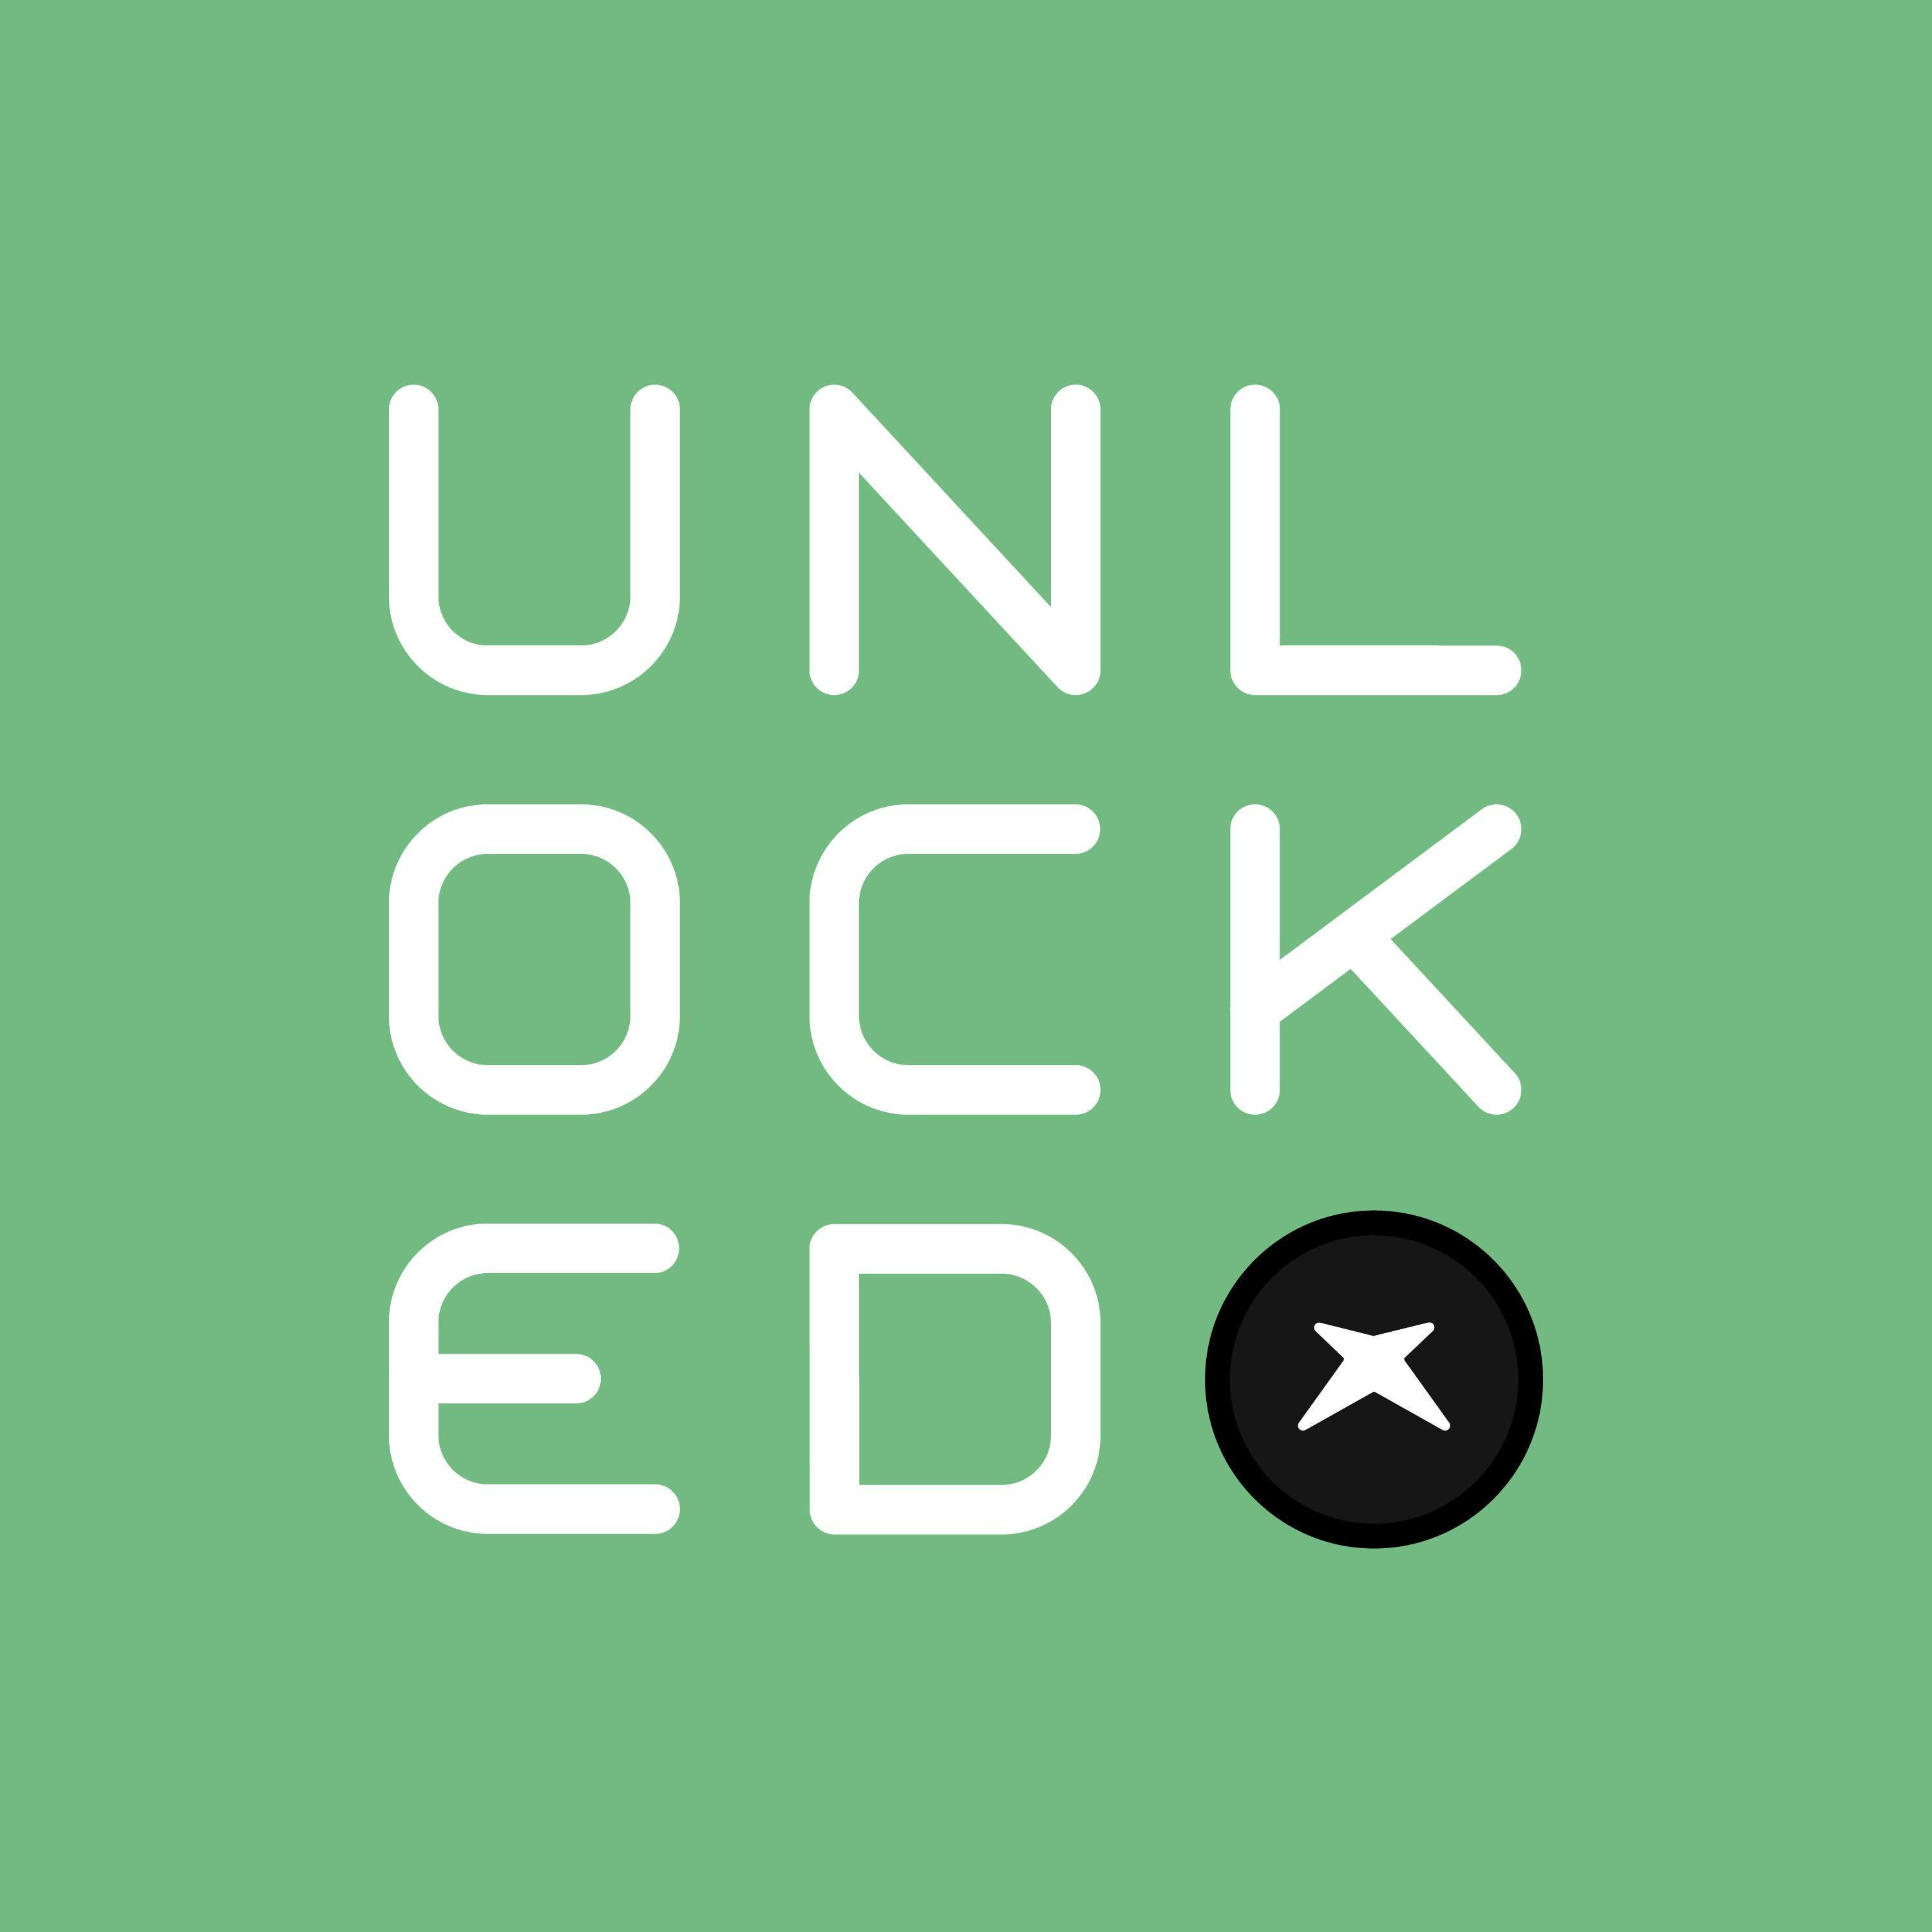 Podcast Unlocked Episode 239: Quantum Comedy and Farewell